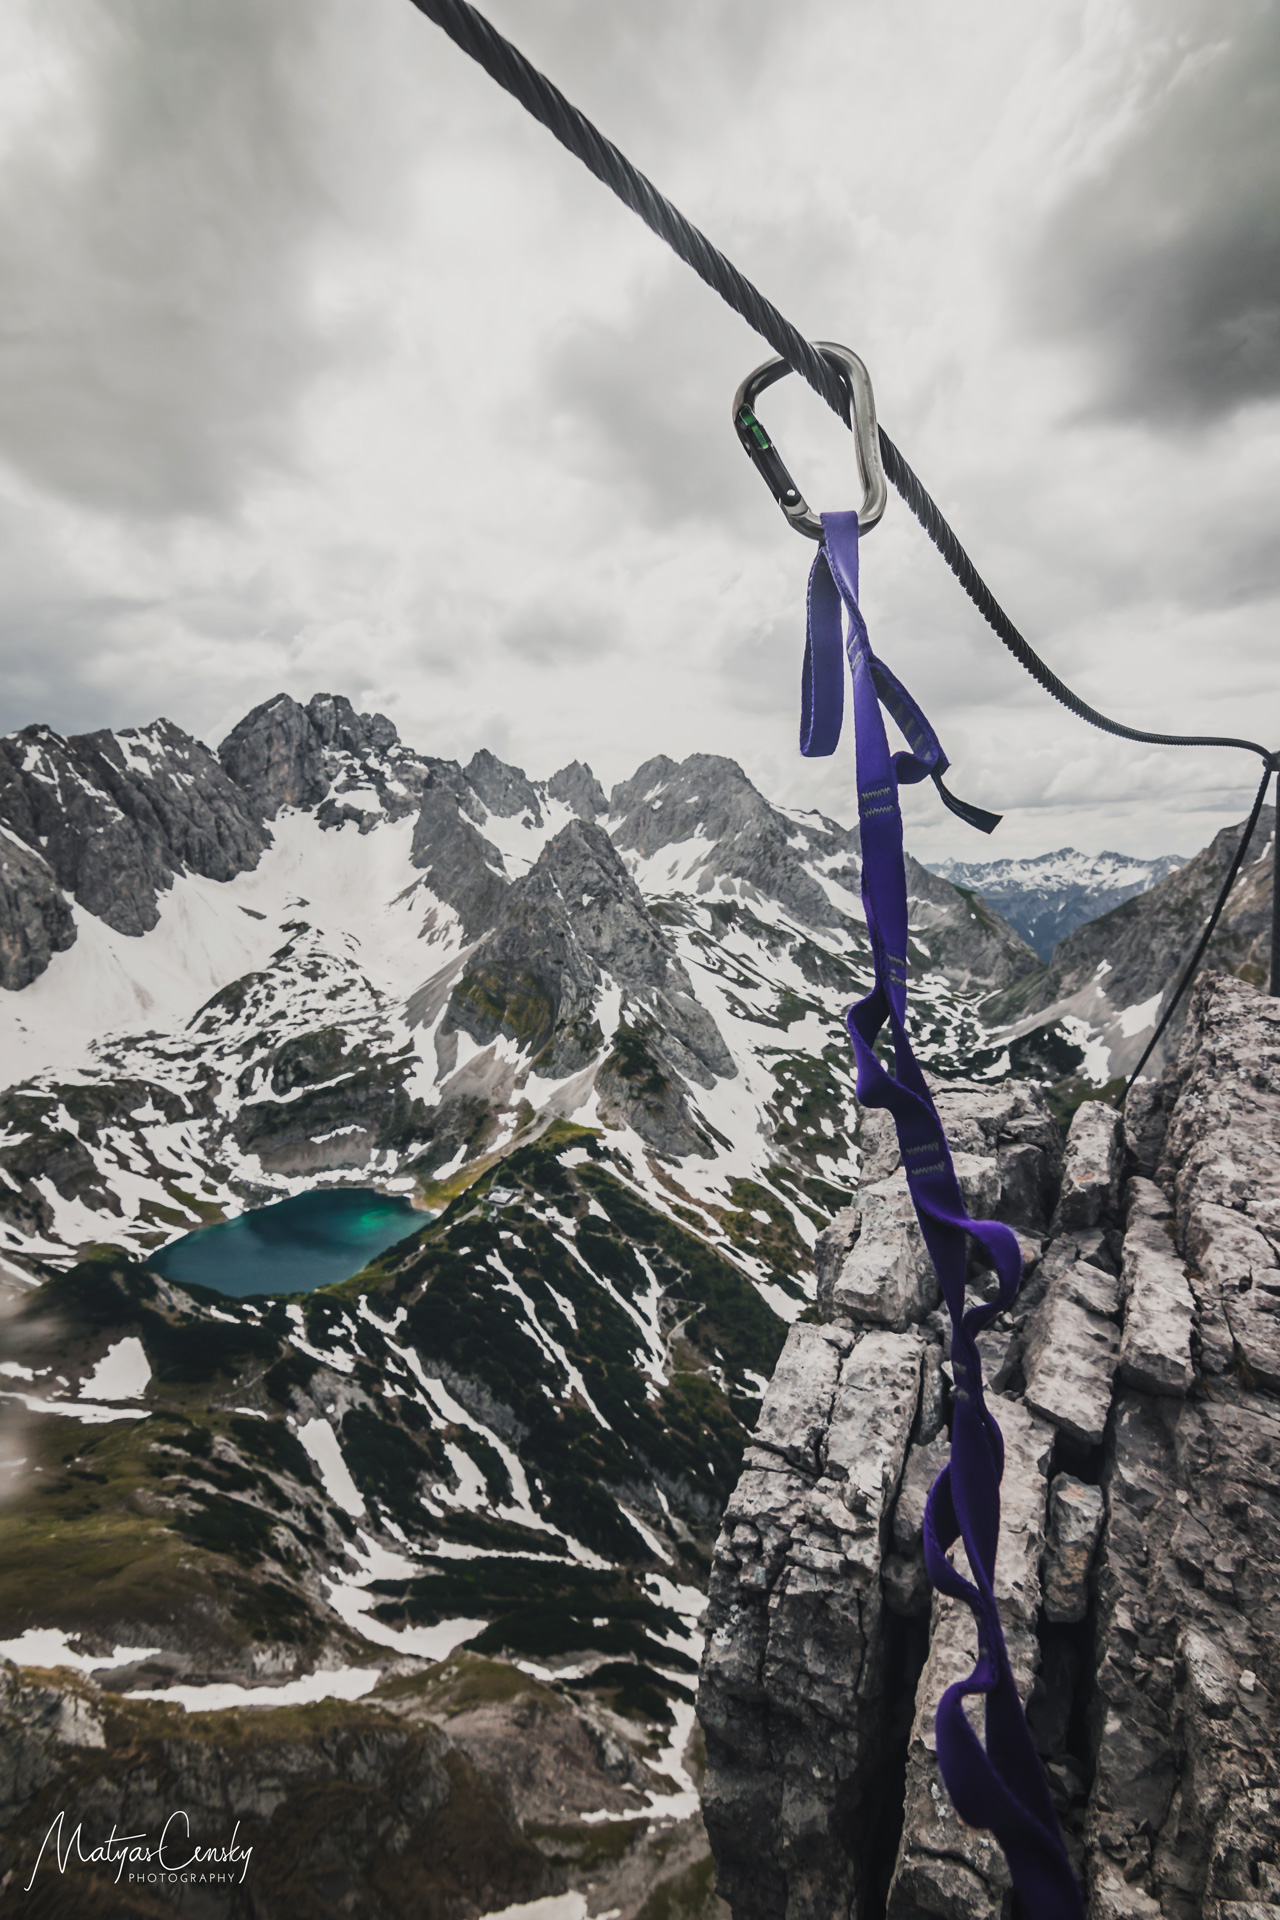 Photo of a carabiner on a via ferrata rope with purple daisy chain as a protection with Drachensee, Austria in the background.